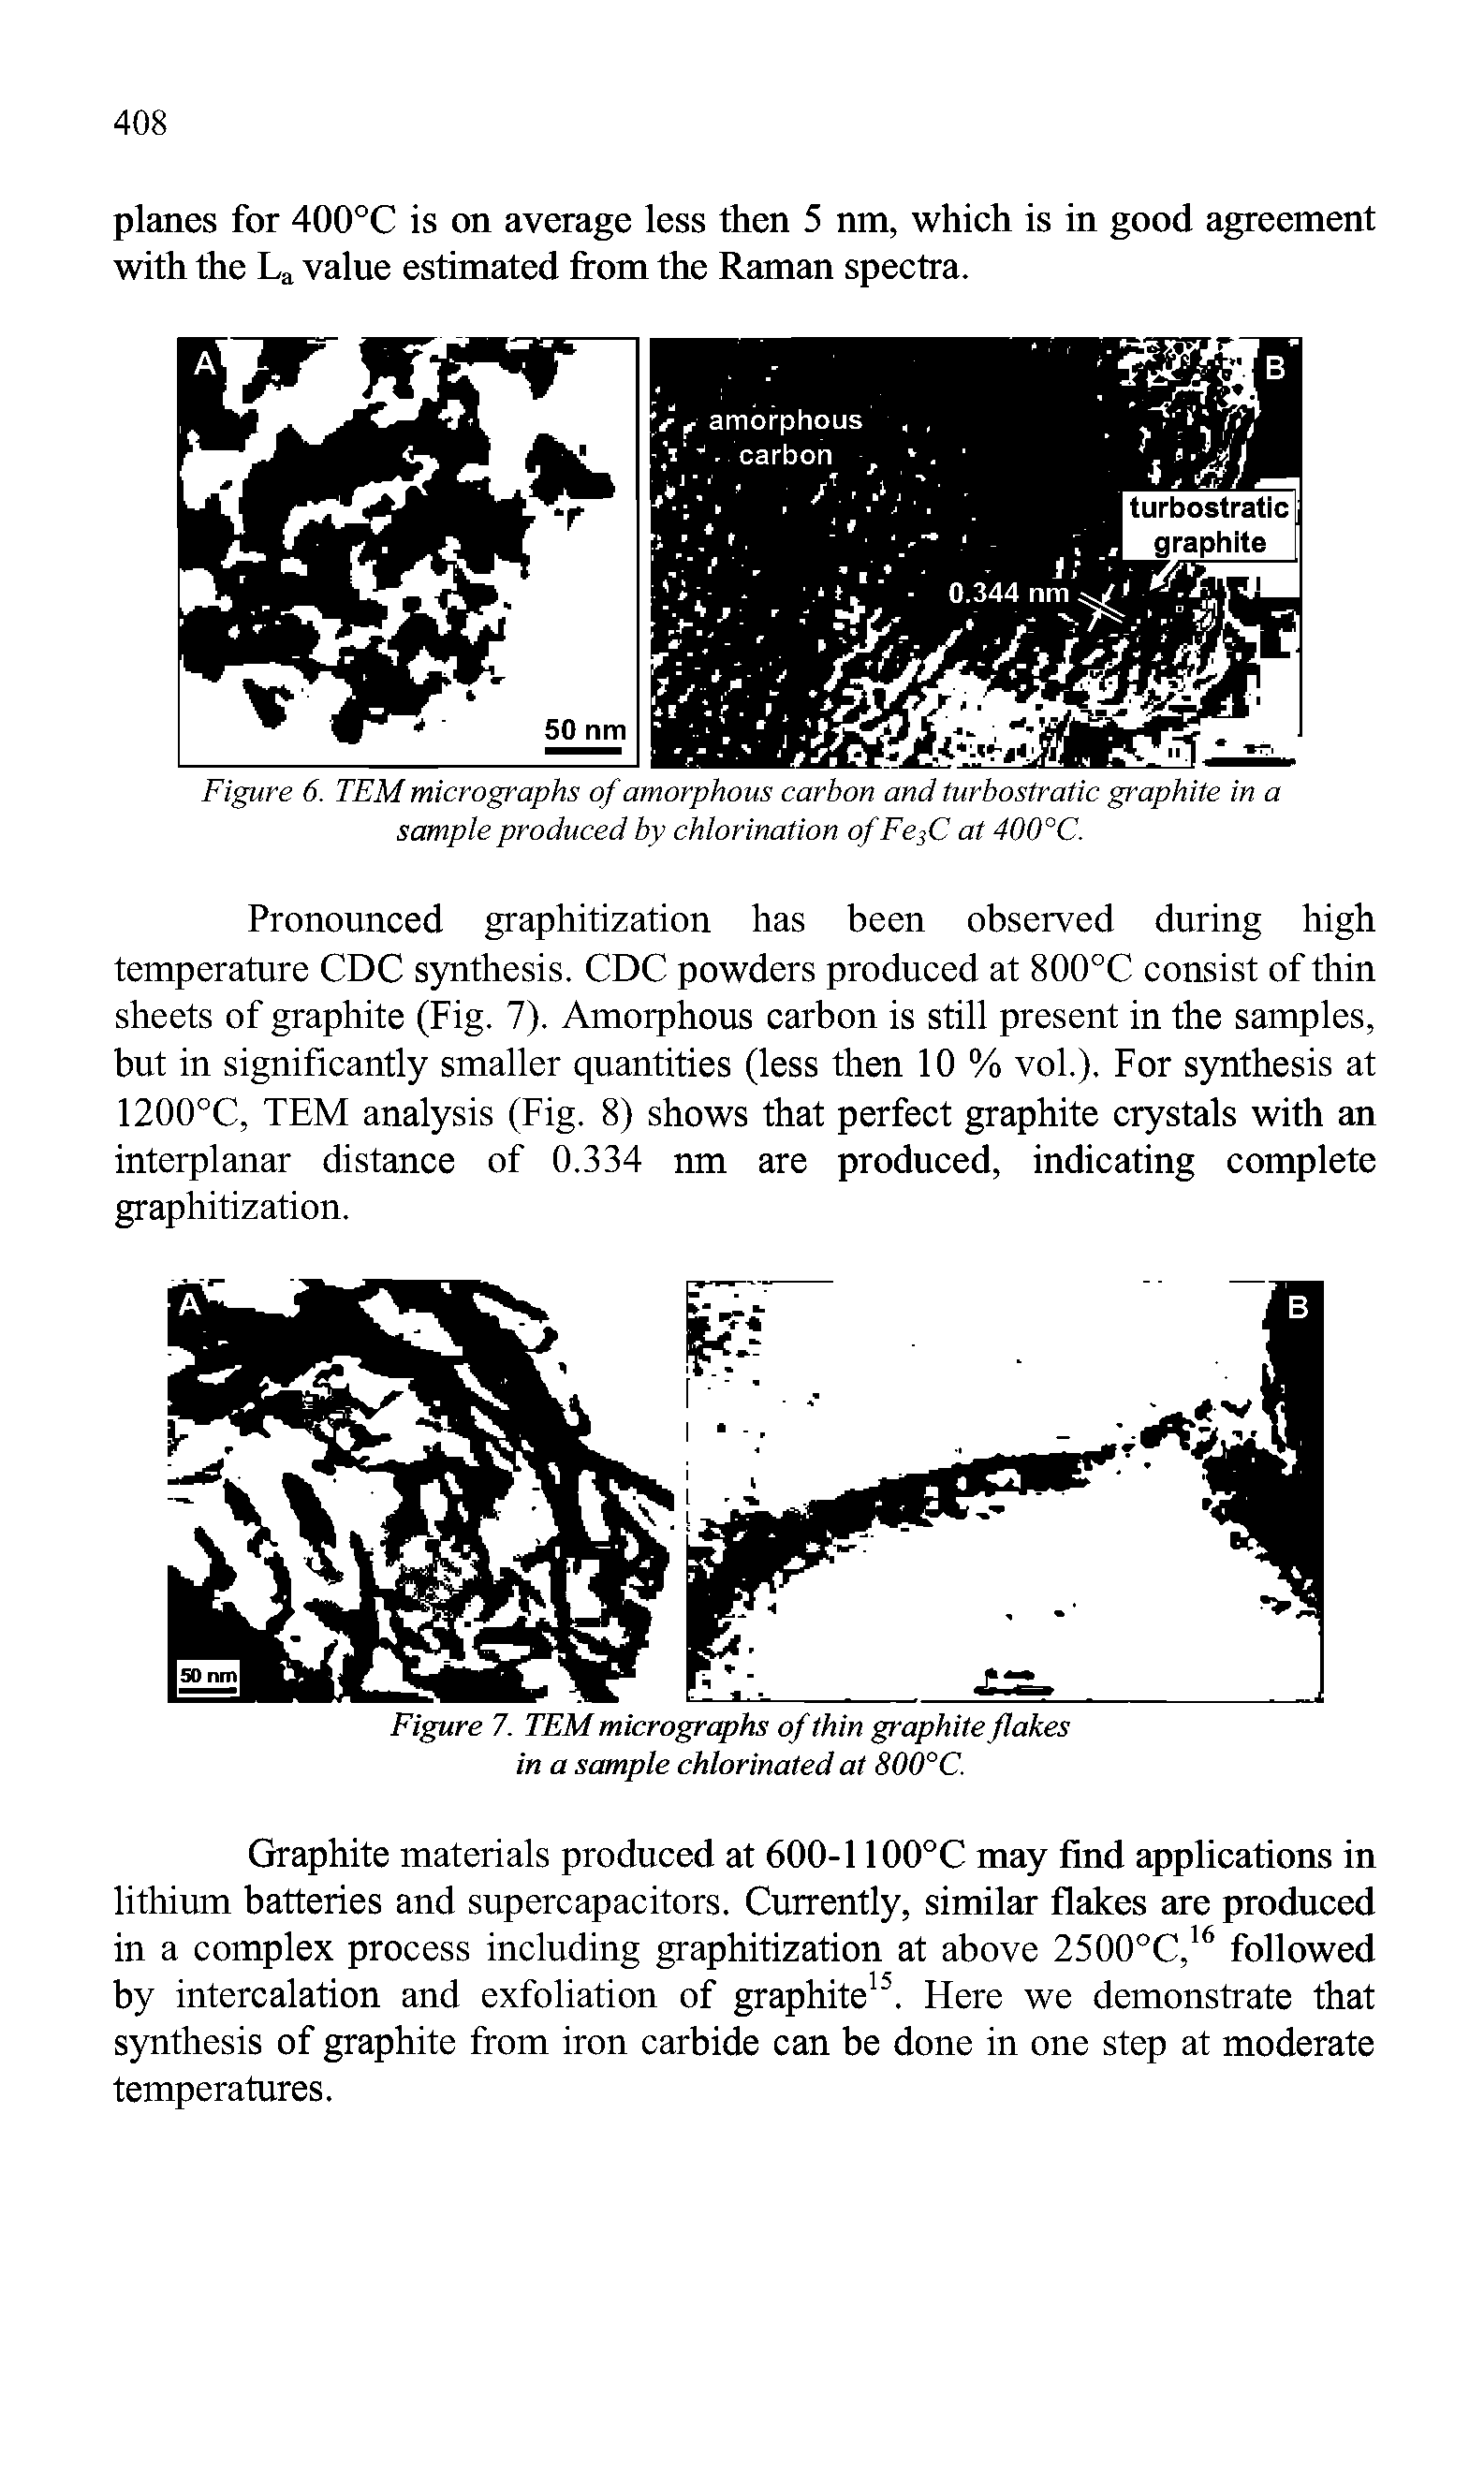 Figure 6. TEM micrographs of amorphous carbon and turbostratic graphite in a sample produced by chlorination ofFe3C at 400°C.